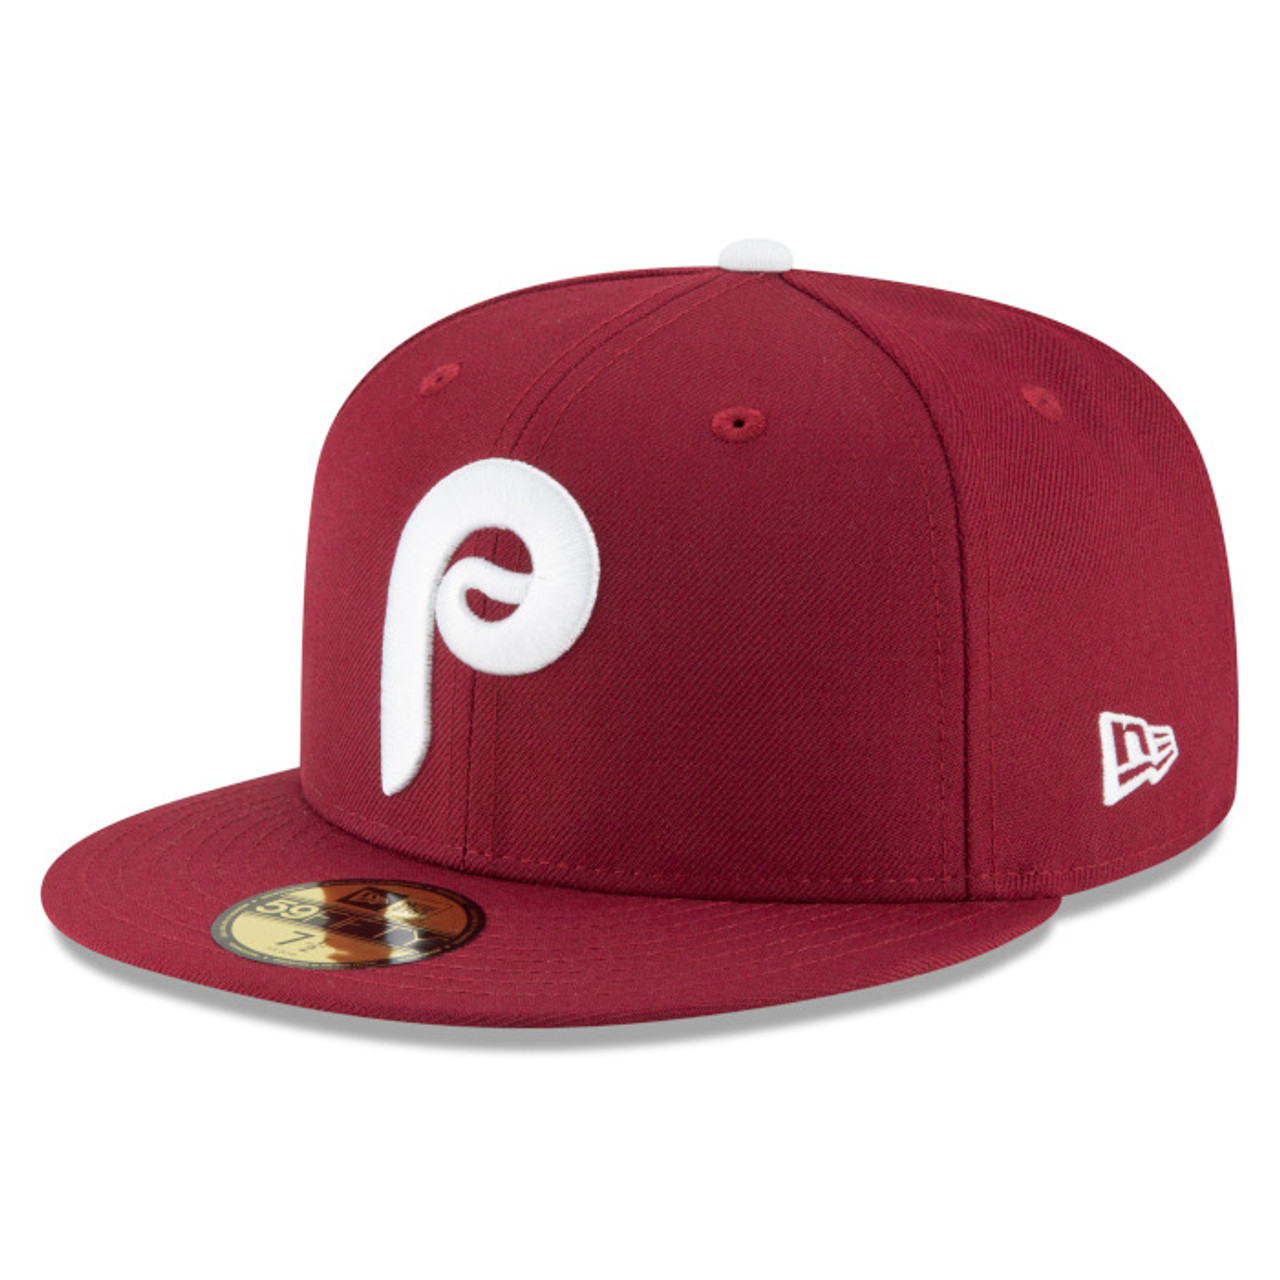 Men’s New Era Philadelphia Phillies 1970 Cooperstown Collection 59FIFTY  Fitted Cap